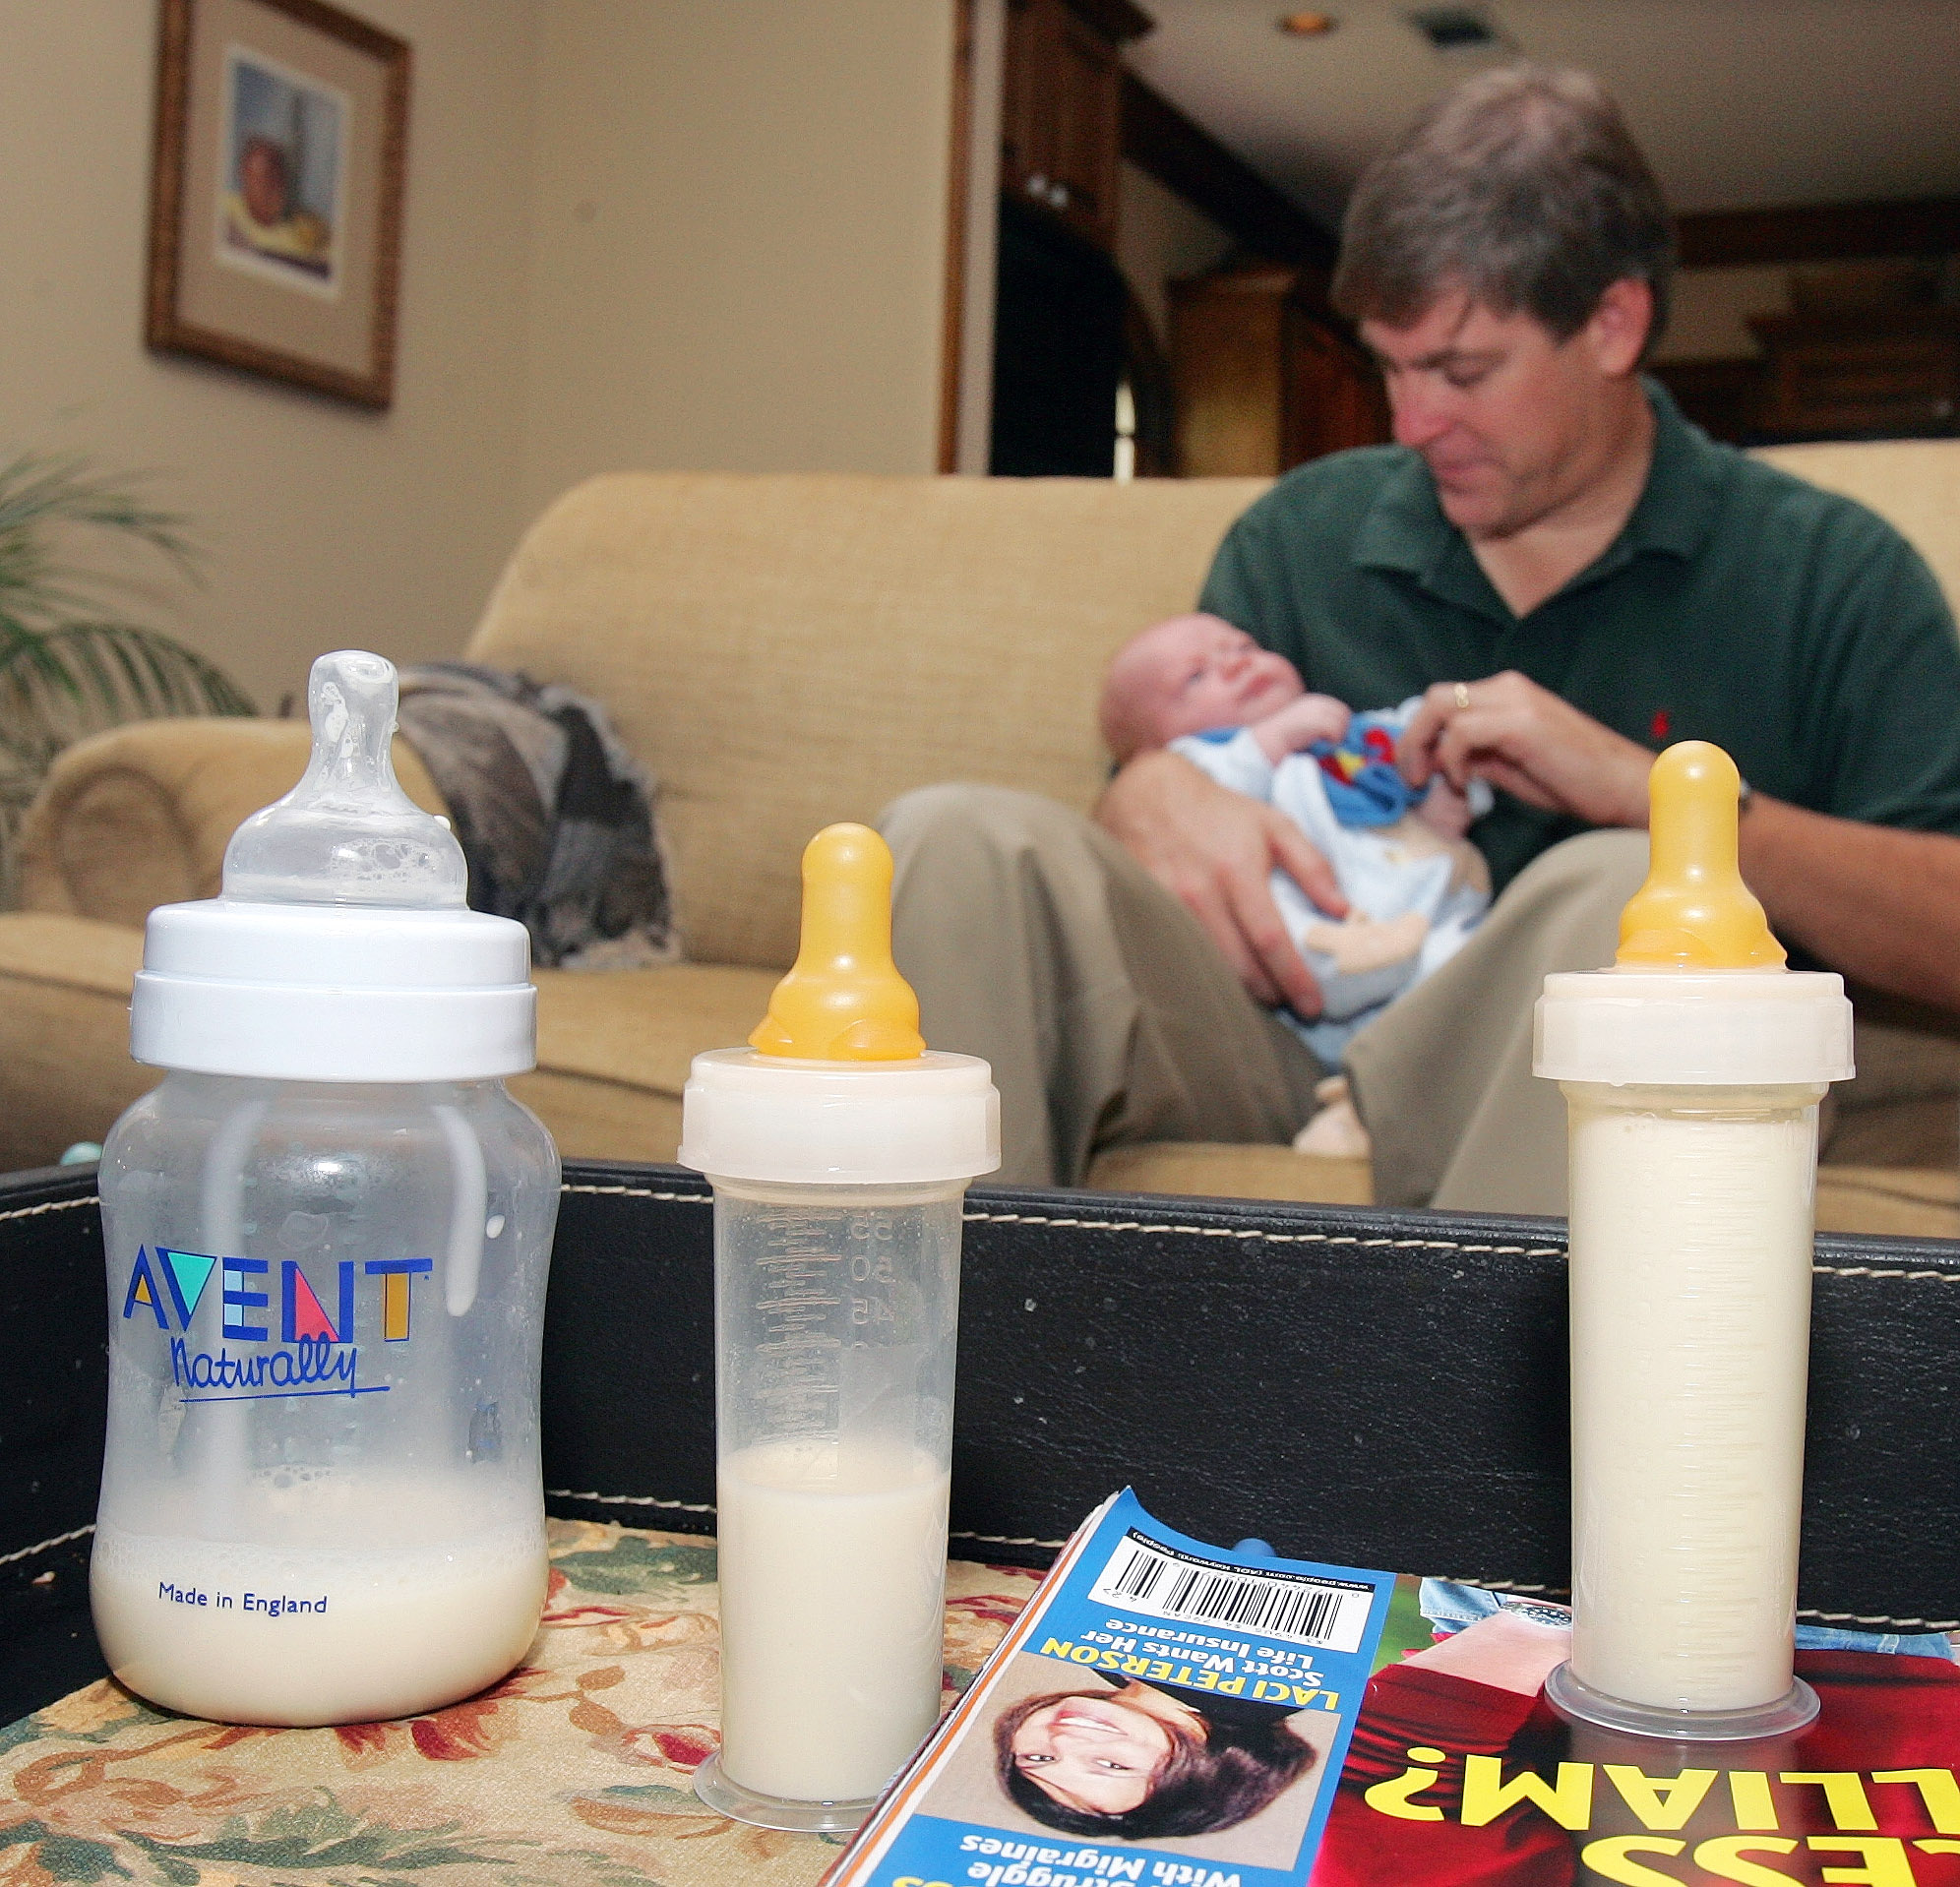 A dad feeds his baby